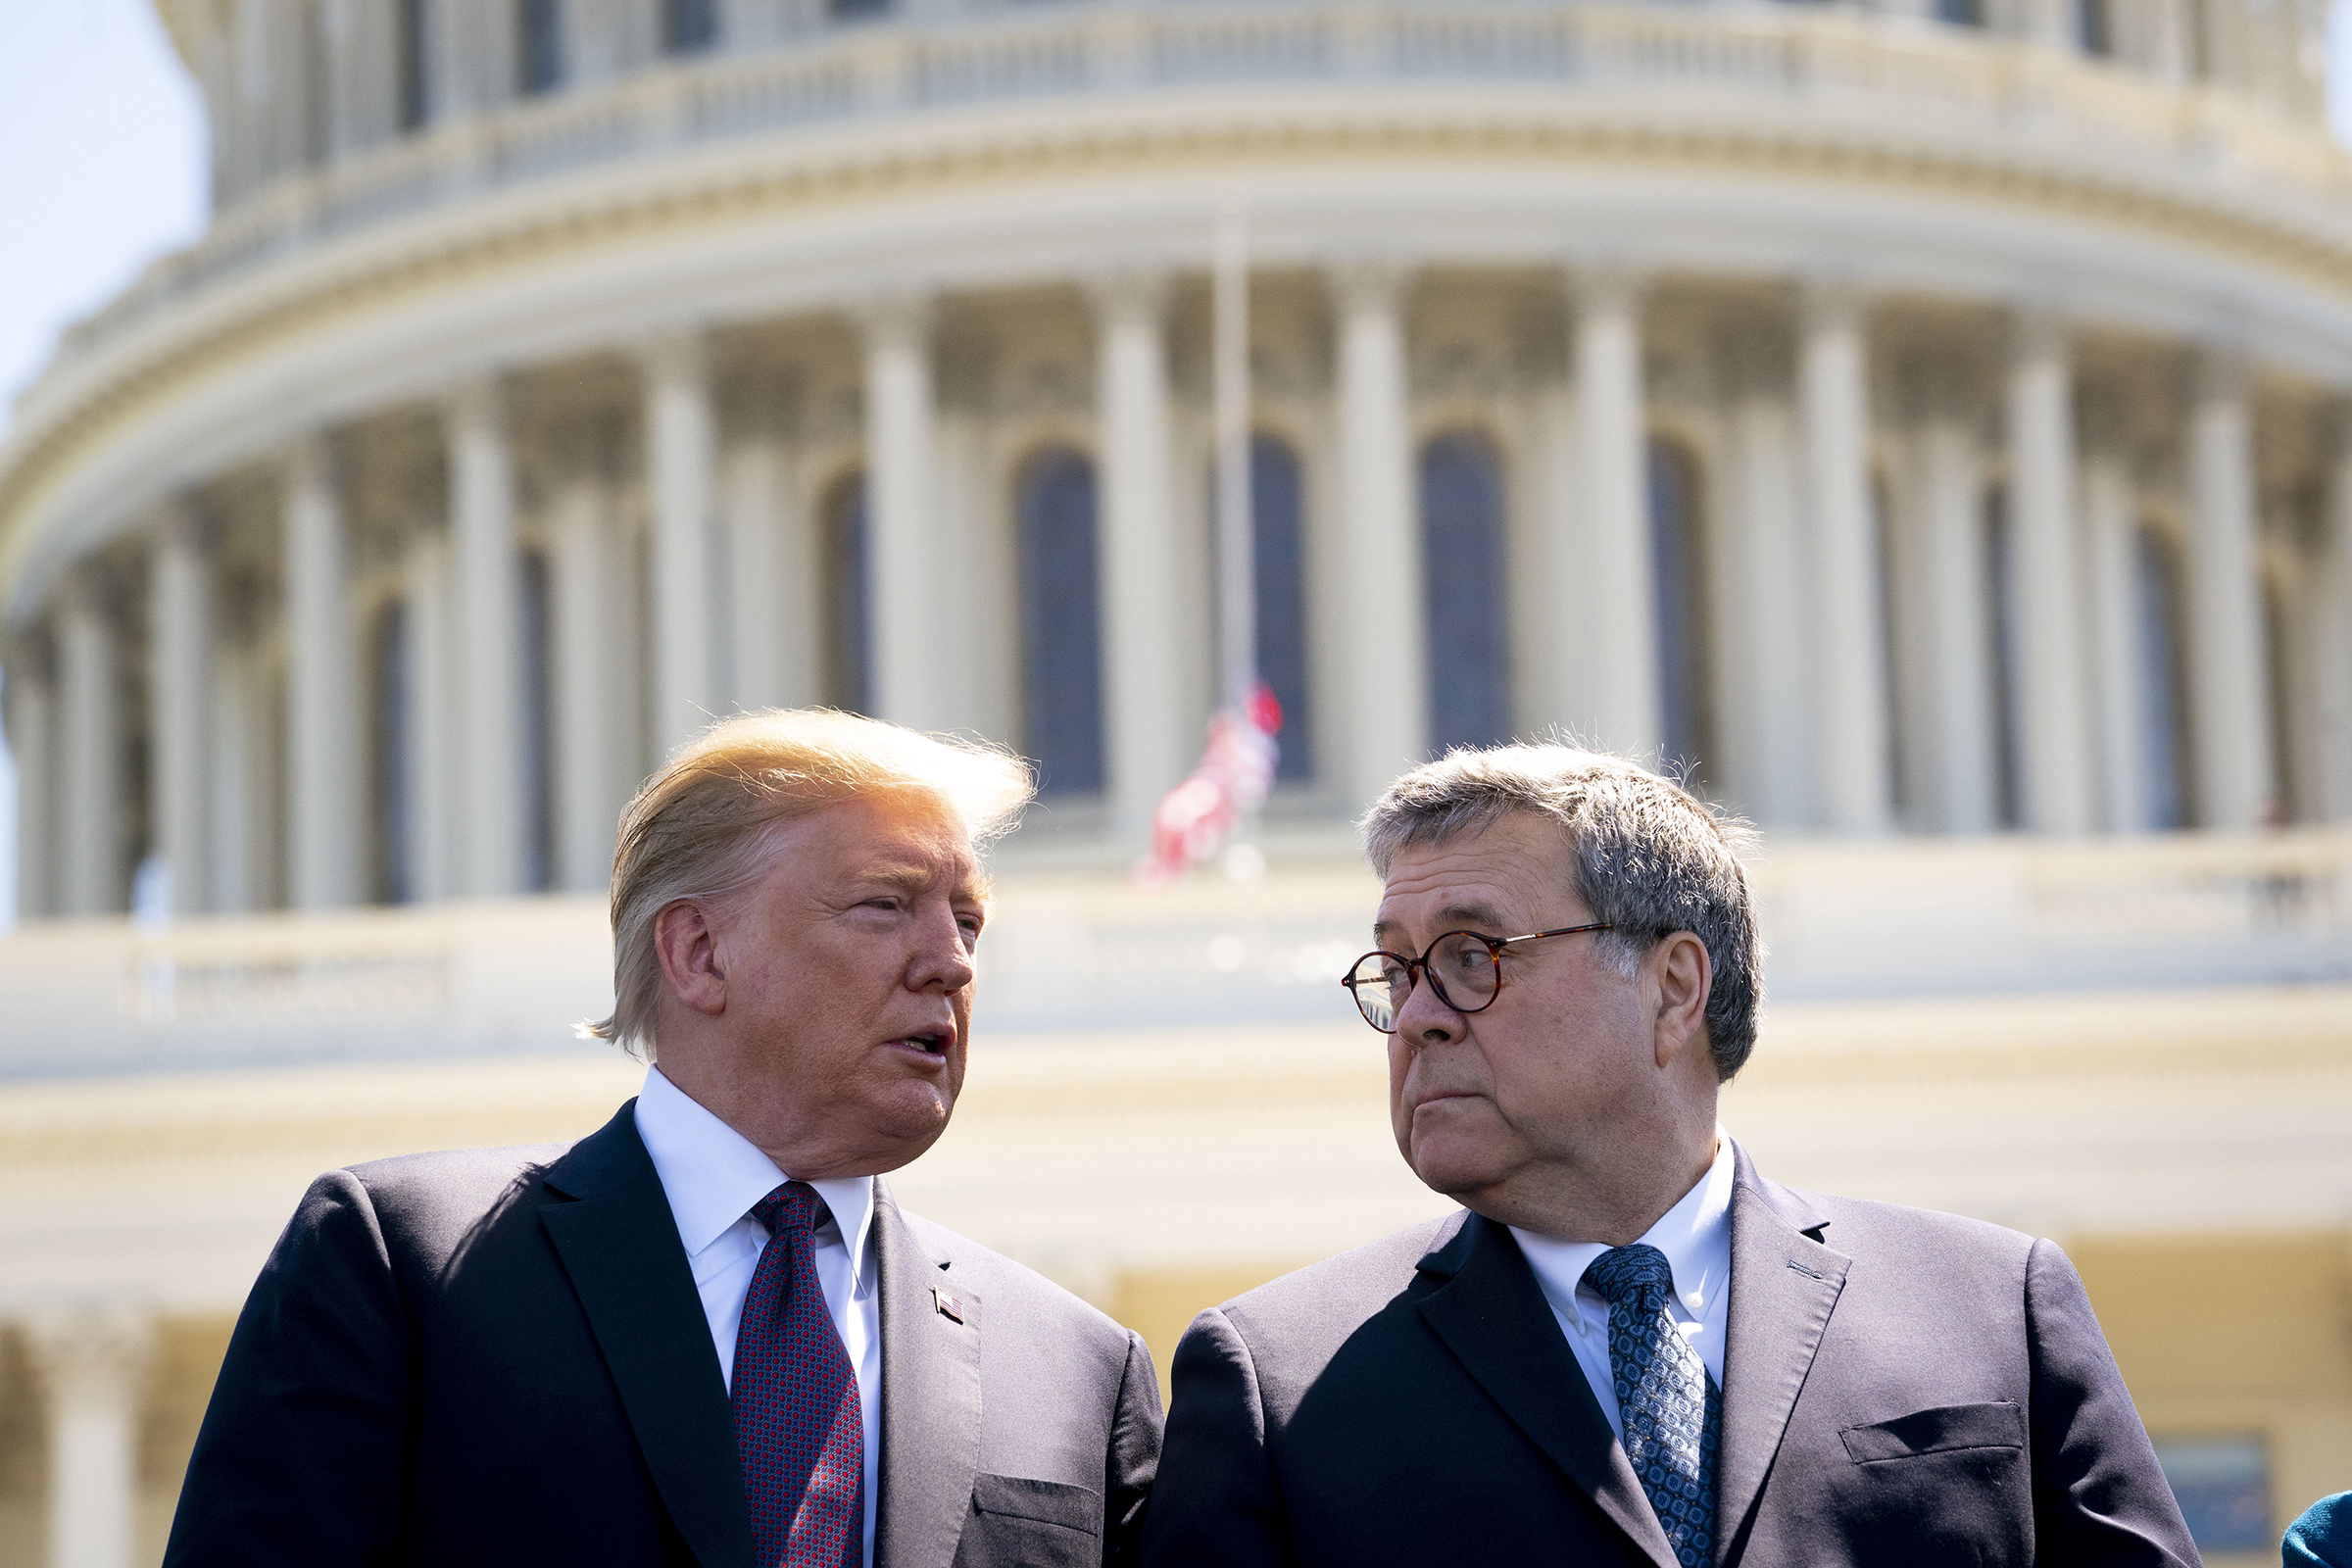 President Donald Trump and Attorney General William Barr talk while attending the 38th Annual National Peace Officers Memorial Service on Capitol Hill.